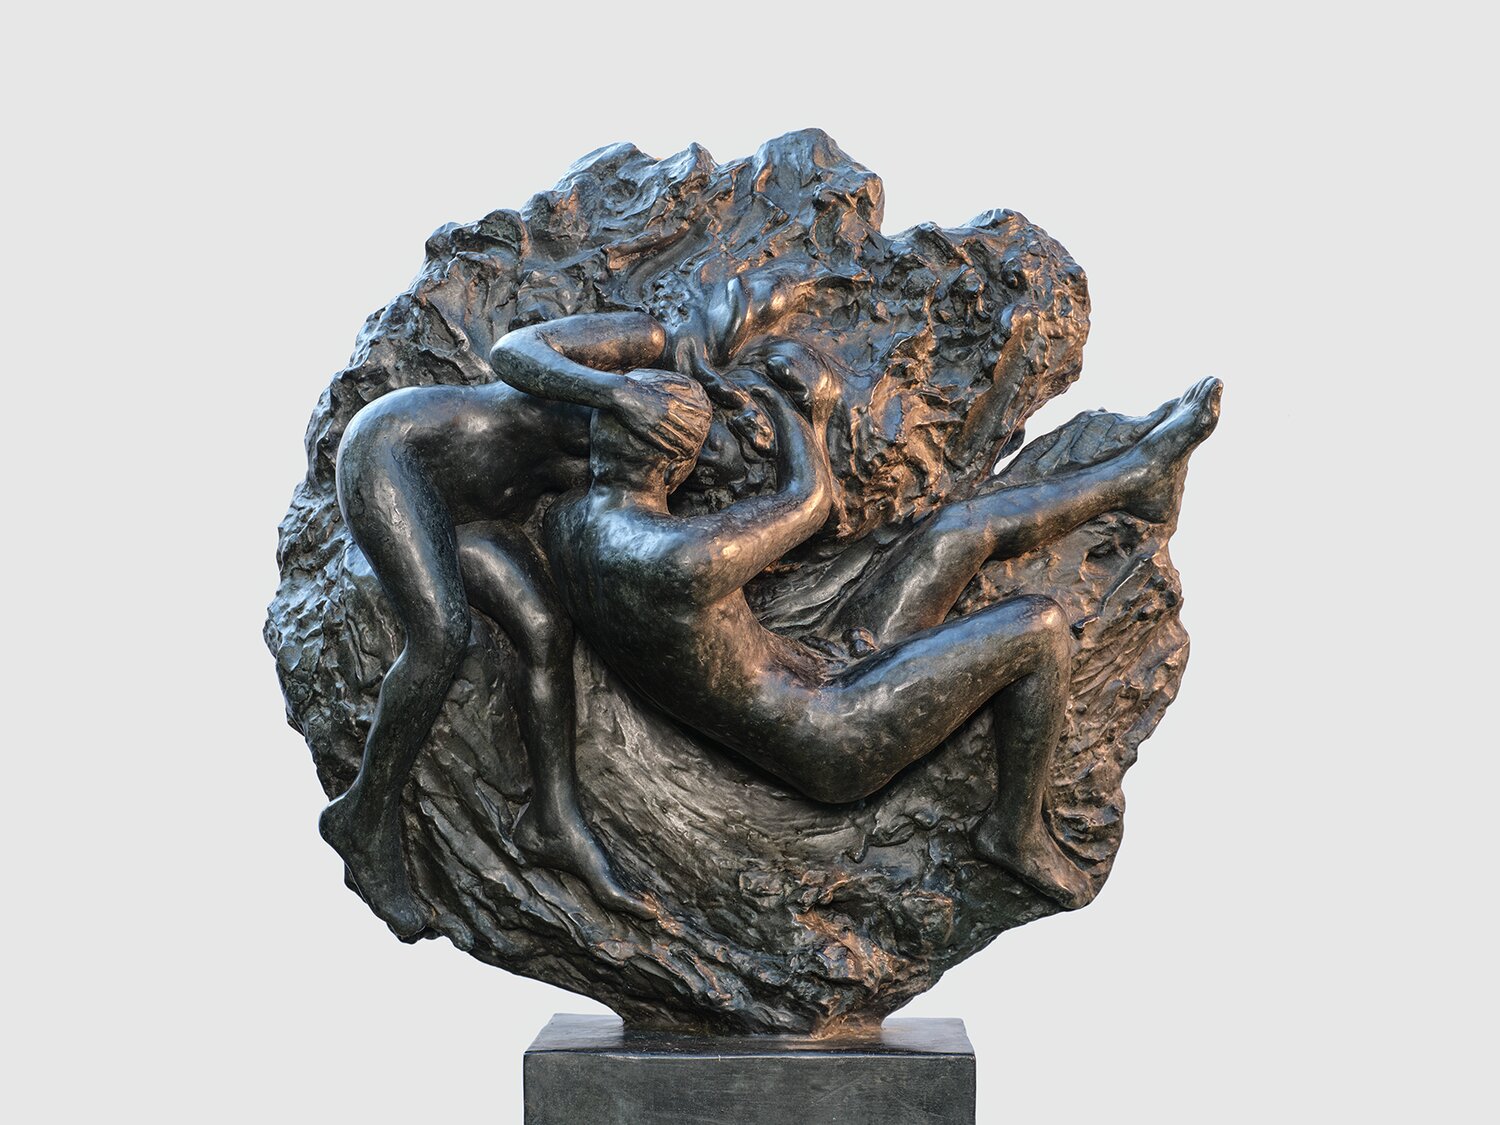 “Creation,” 1981–82, is a bronze, edition 3/9, by George R. Anthonisen (b. 1936), from the Collection of Carol and Louis Della Penna.